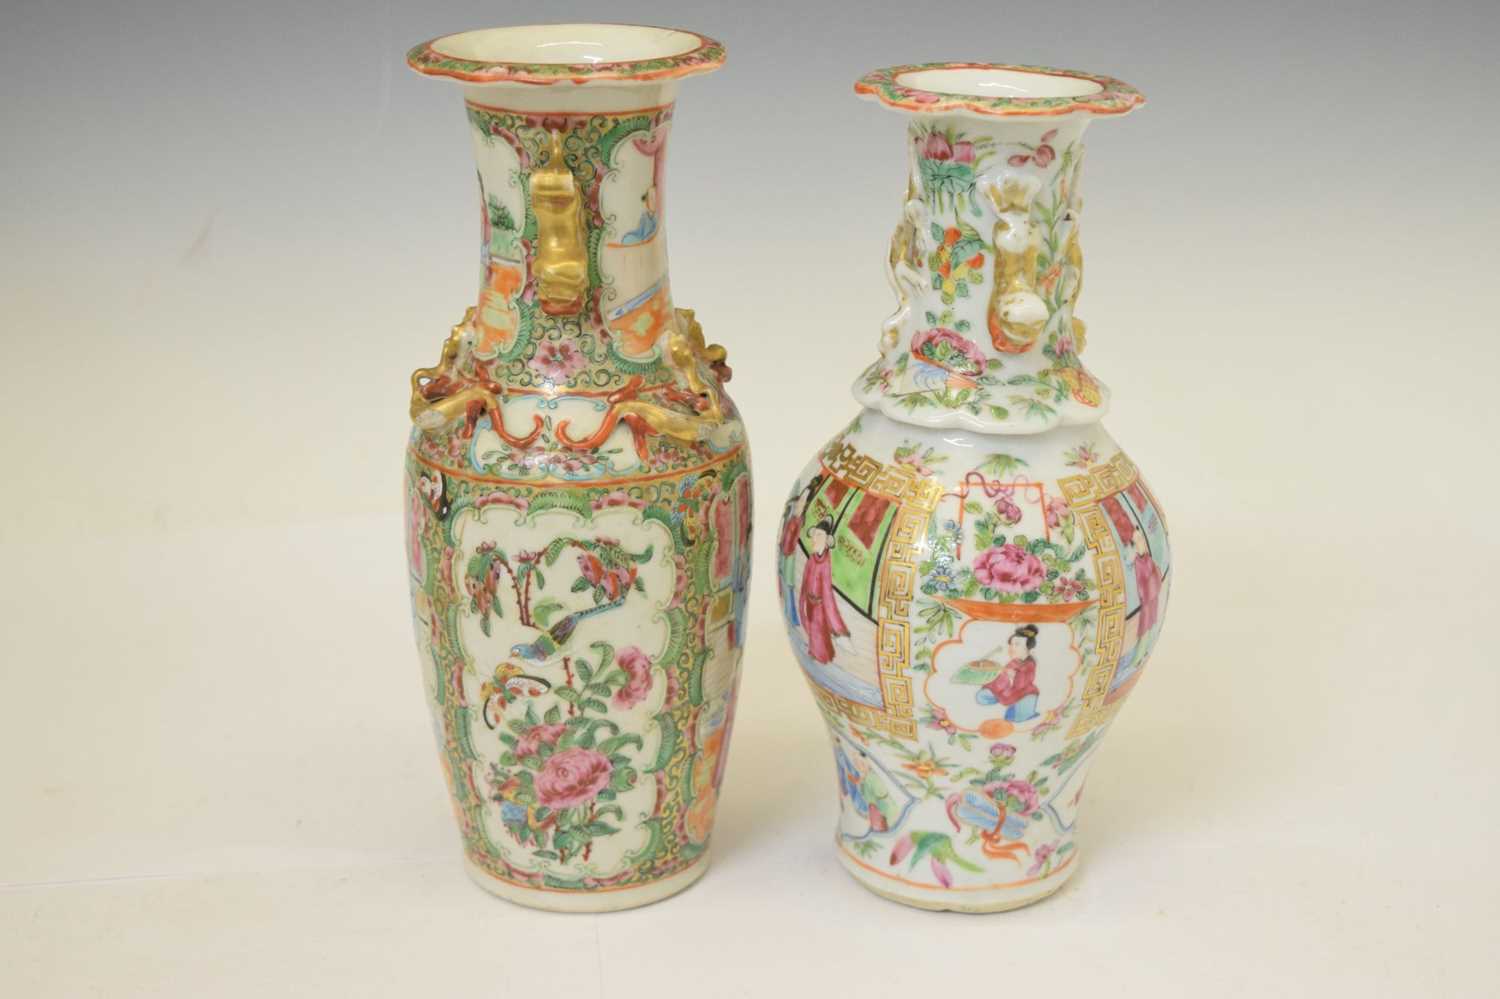 Two Chinese Famille Rose porcelain vases - Image 7 of 11